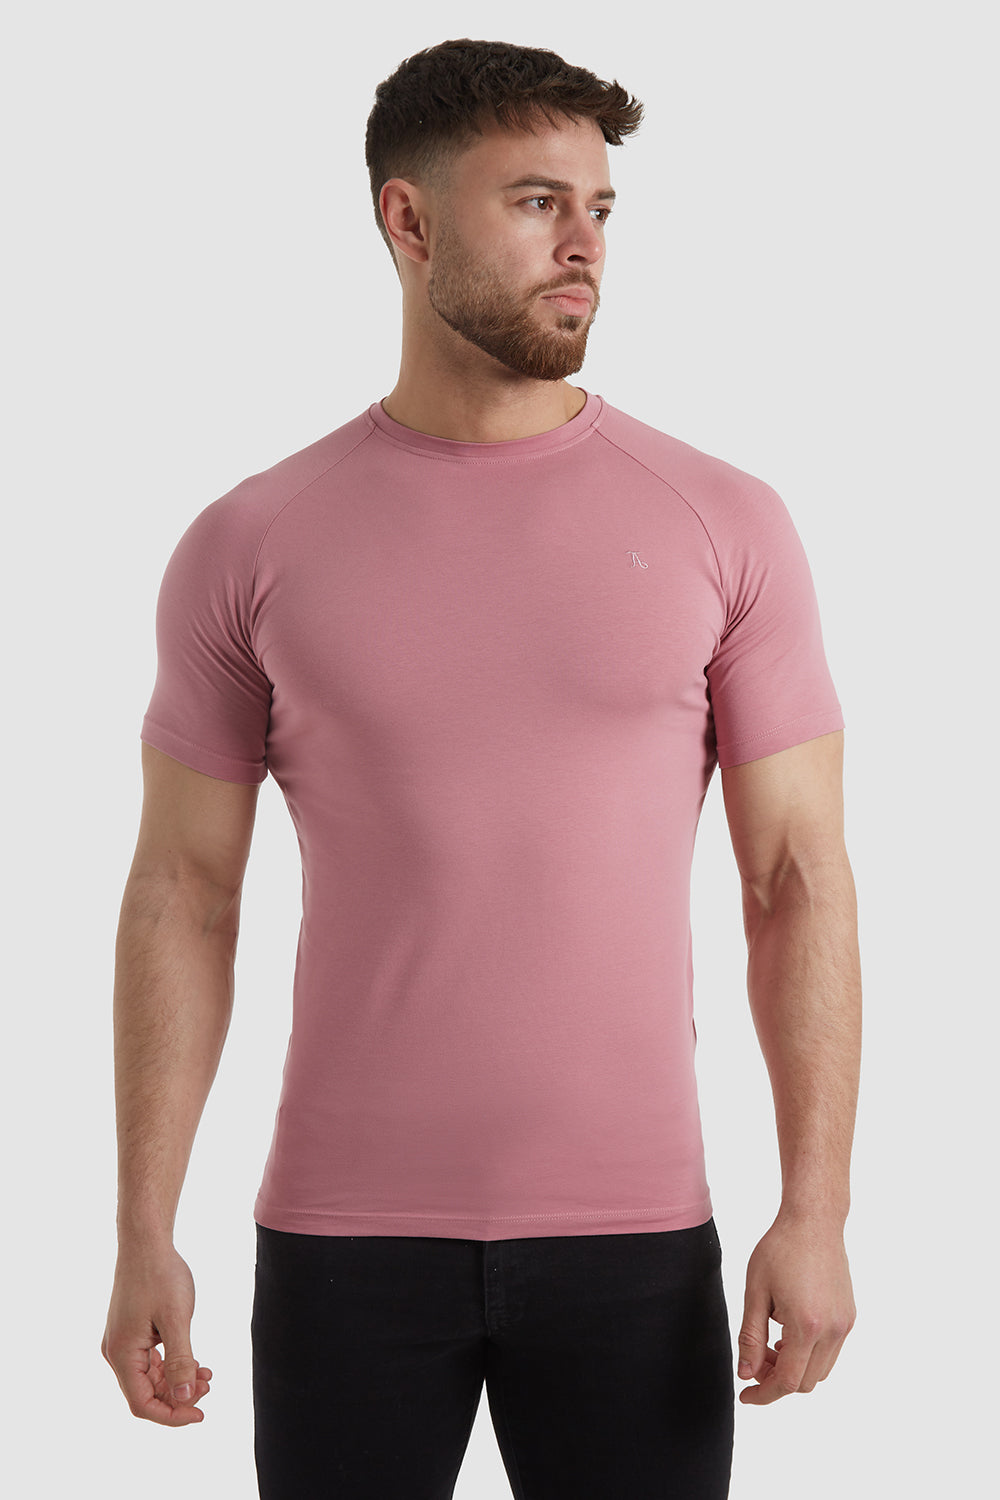 Athletic Fit T-Shirt in Vintage Pink - TAILORED ATHLETE - USA